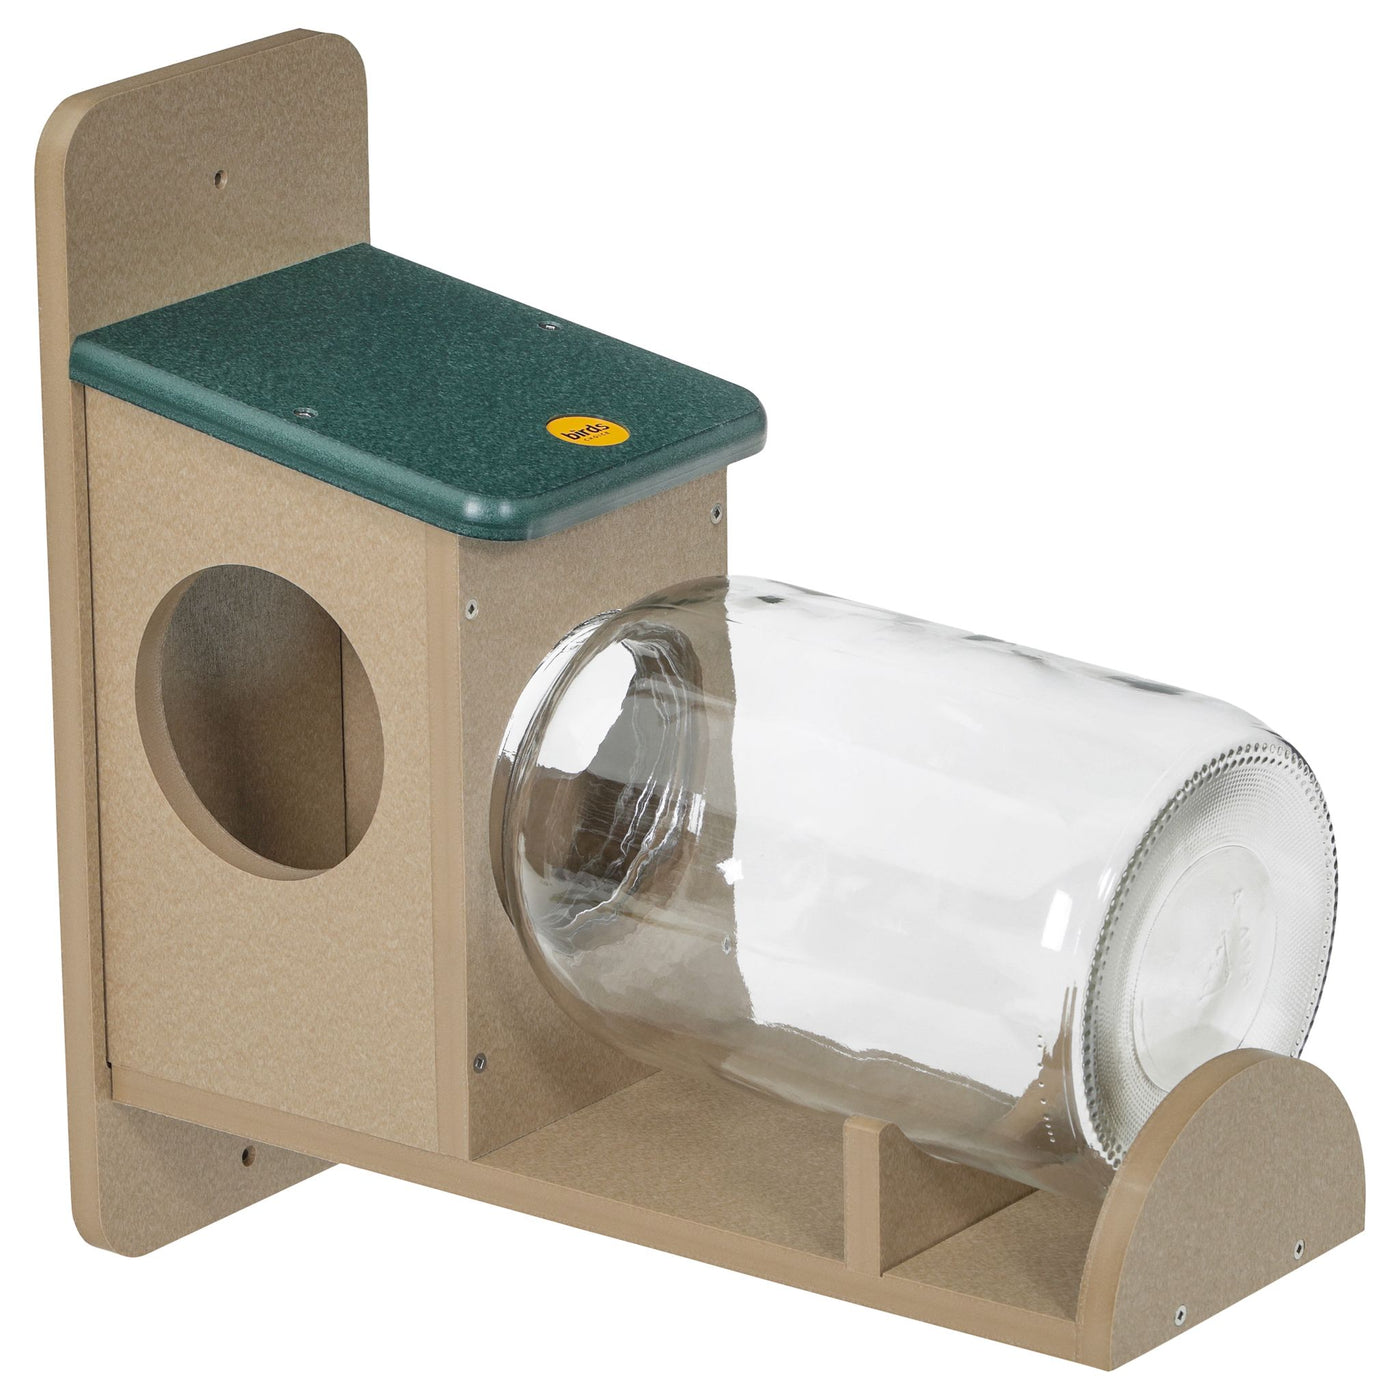 Squirrel Jar Feeder in Taupe and Green Recycled Plastic